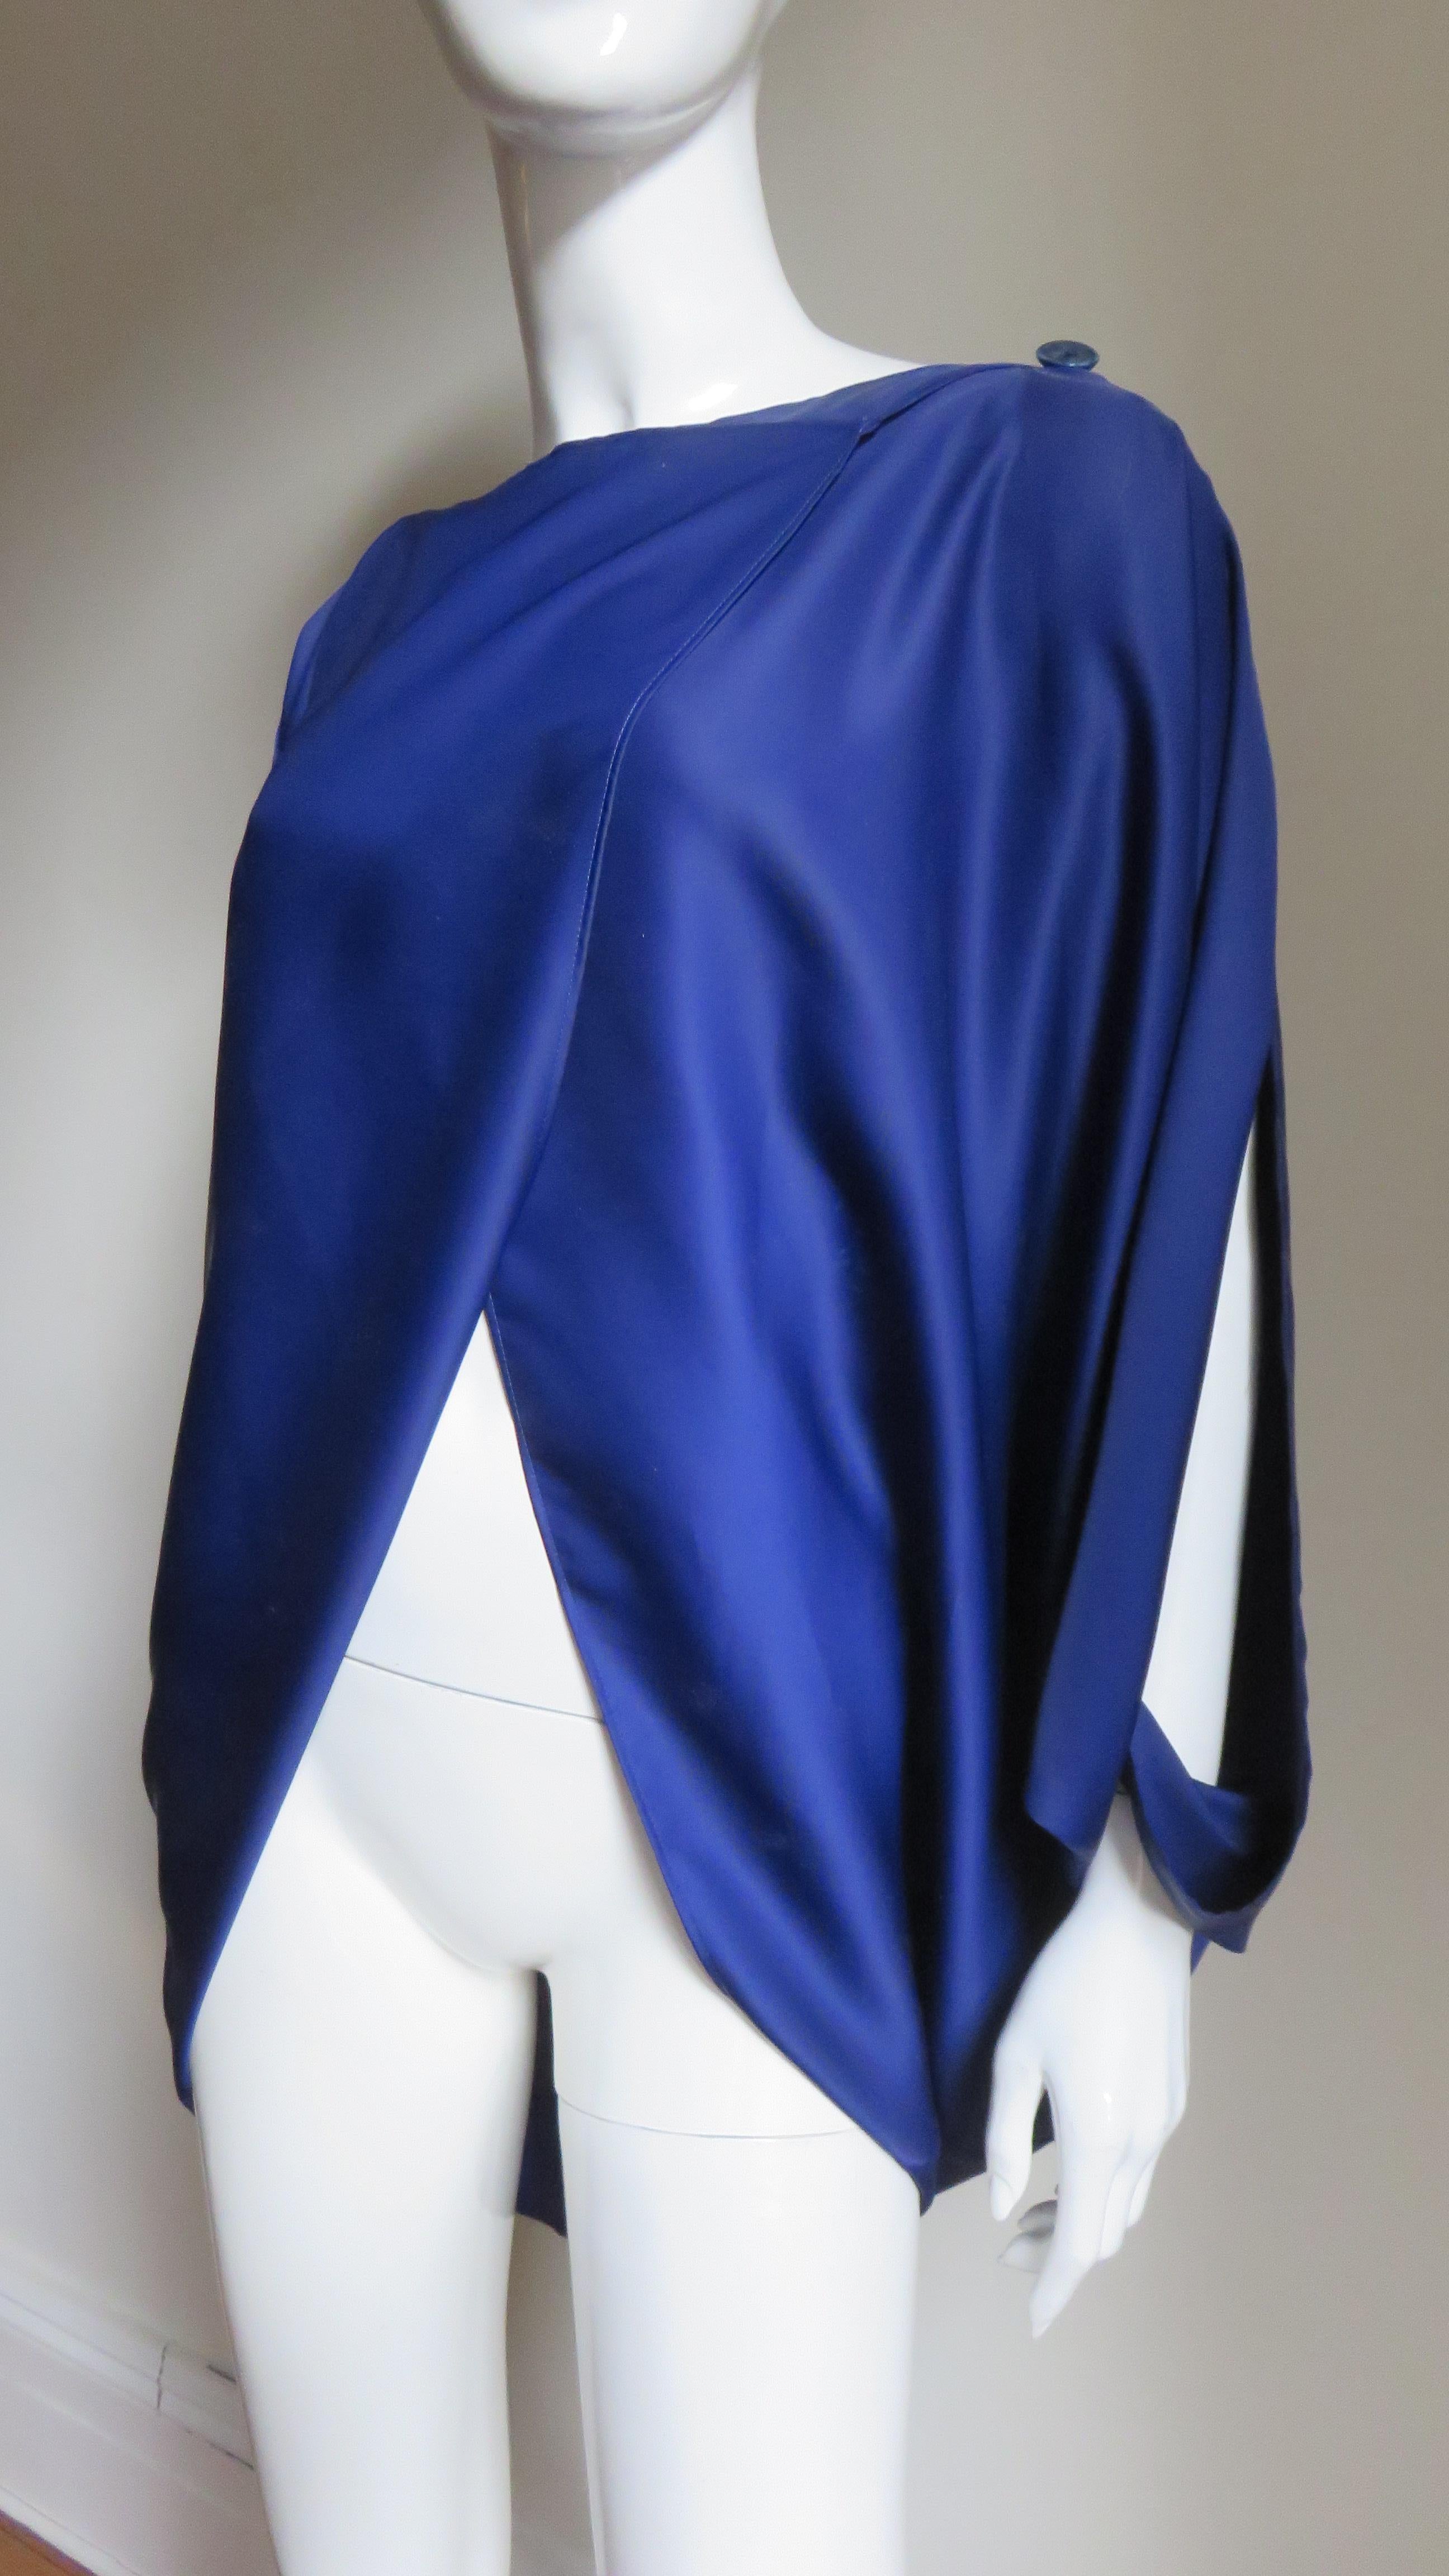 Issey Miyake Open Sleeve Draped Top In Excellent Condition For Sale In Water Mill, NY